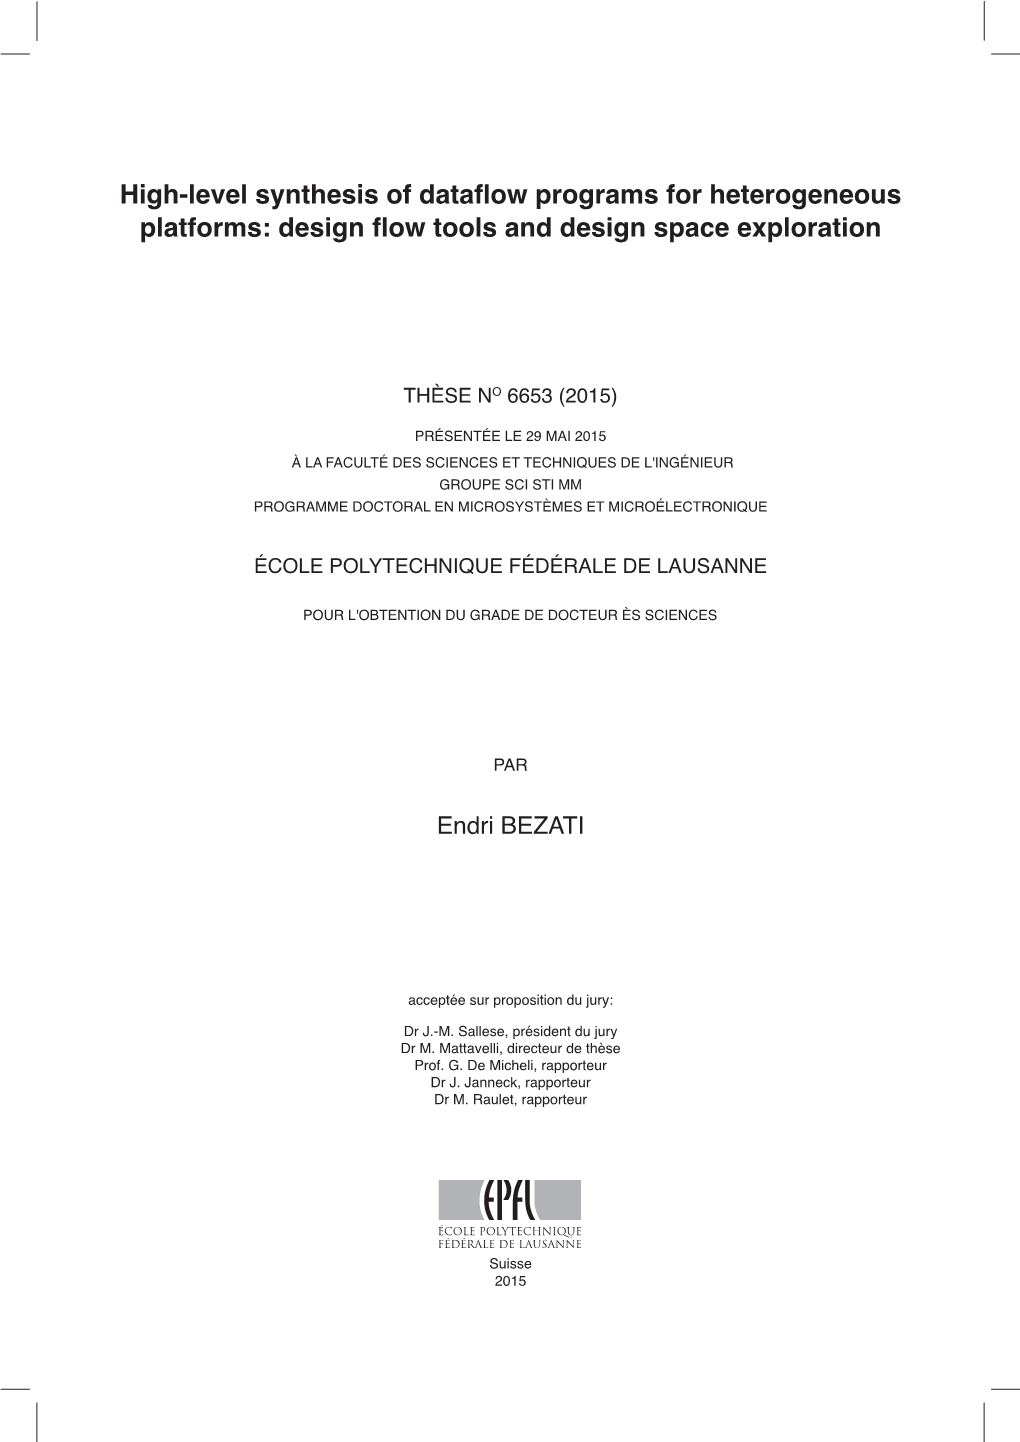 High-Level Synthesis of Dataflow Programs for Heterogeneous Platforms: Design Flow Tools and Design Space Exploration